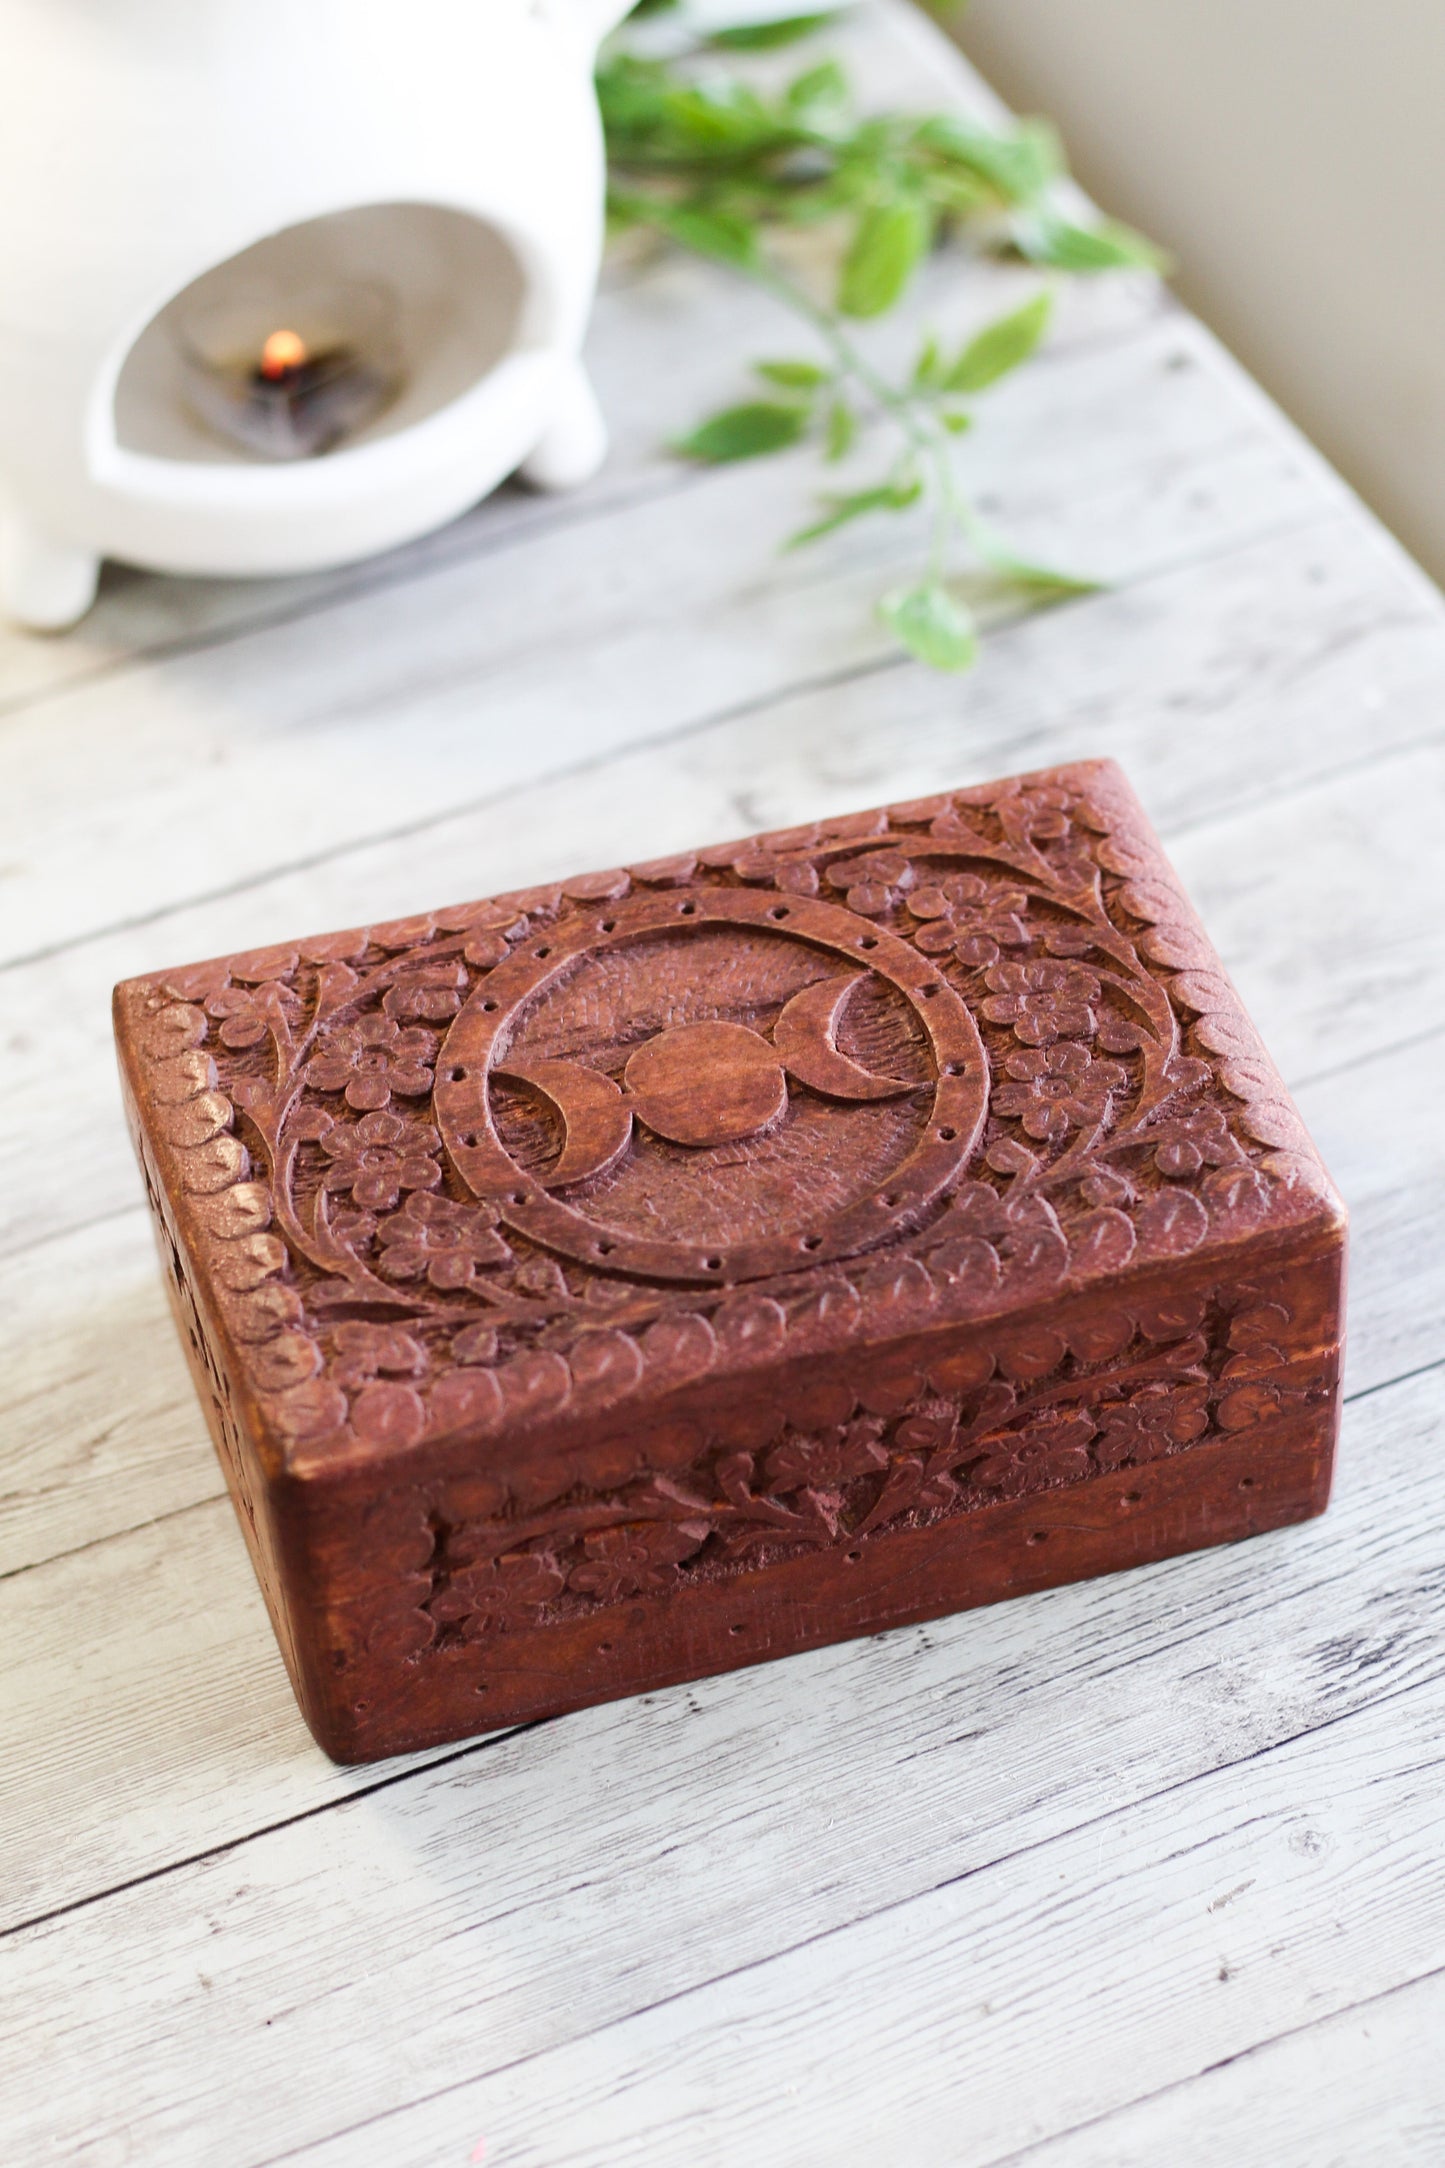 Triple Moon Carved Wooden Box Altarware | Altar